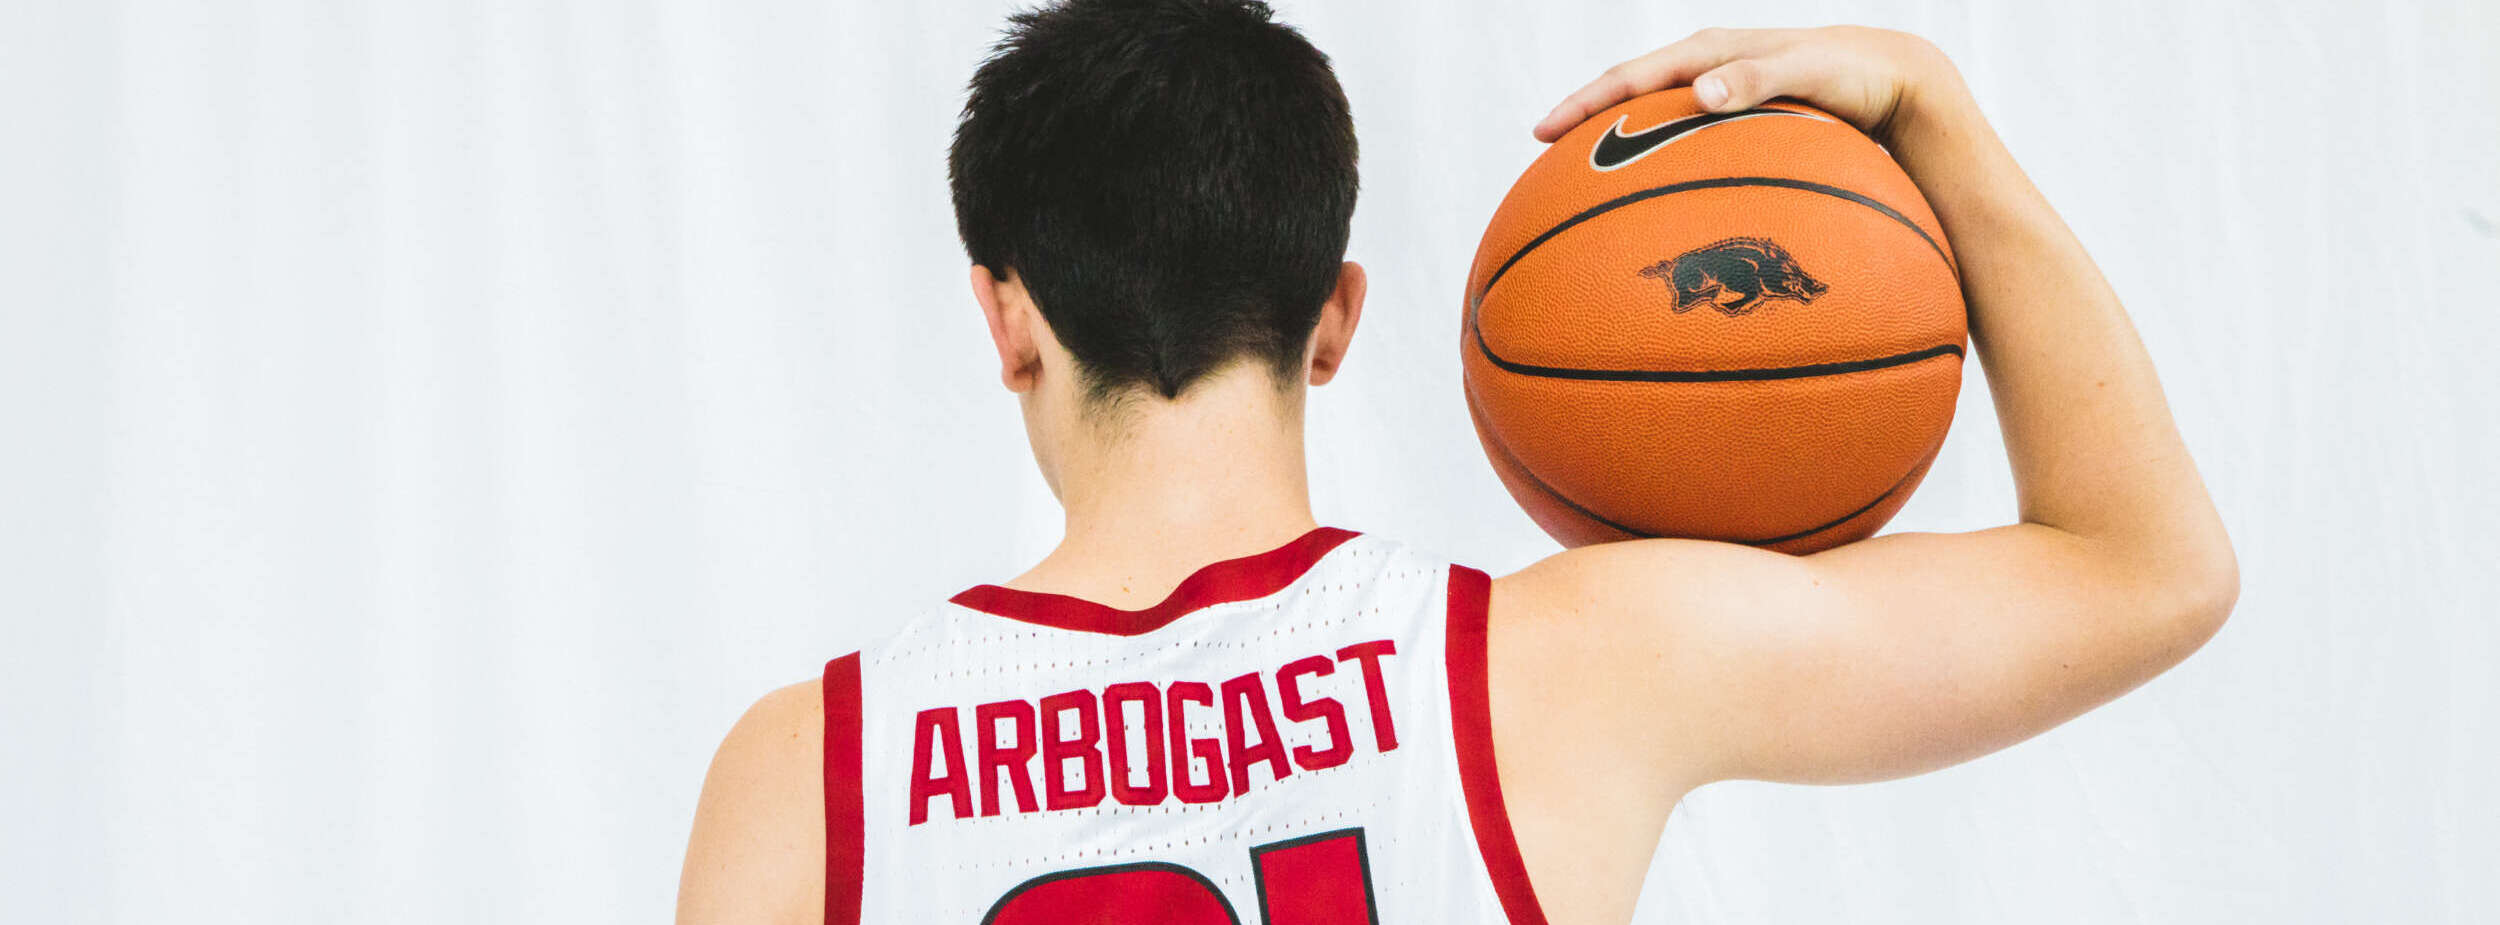 Arbogast Sports & Outdoors